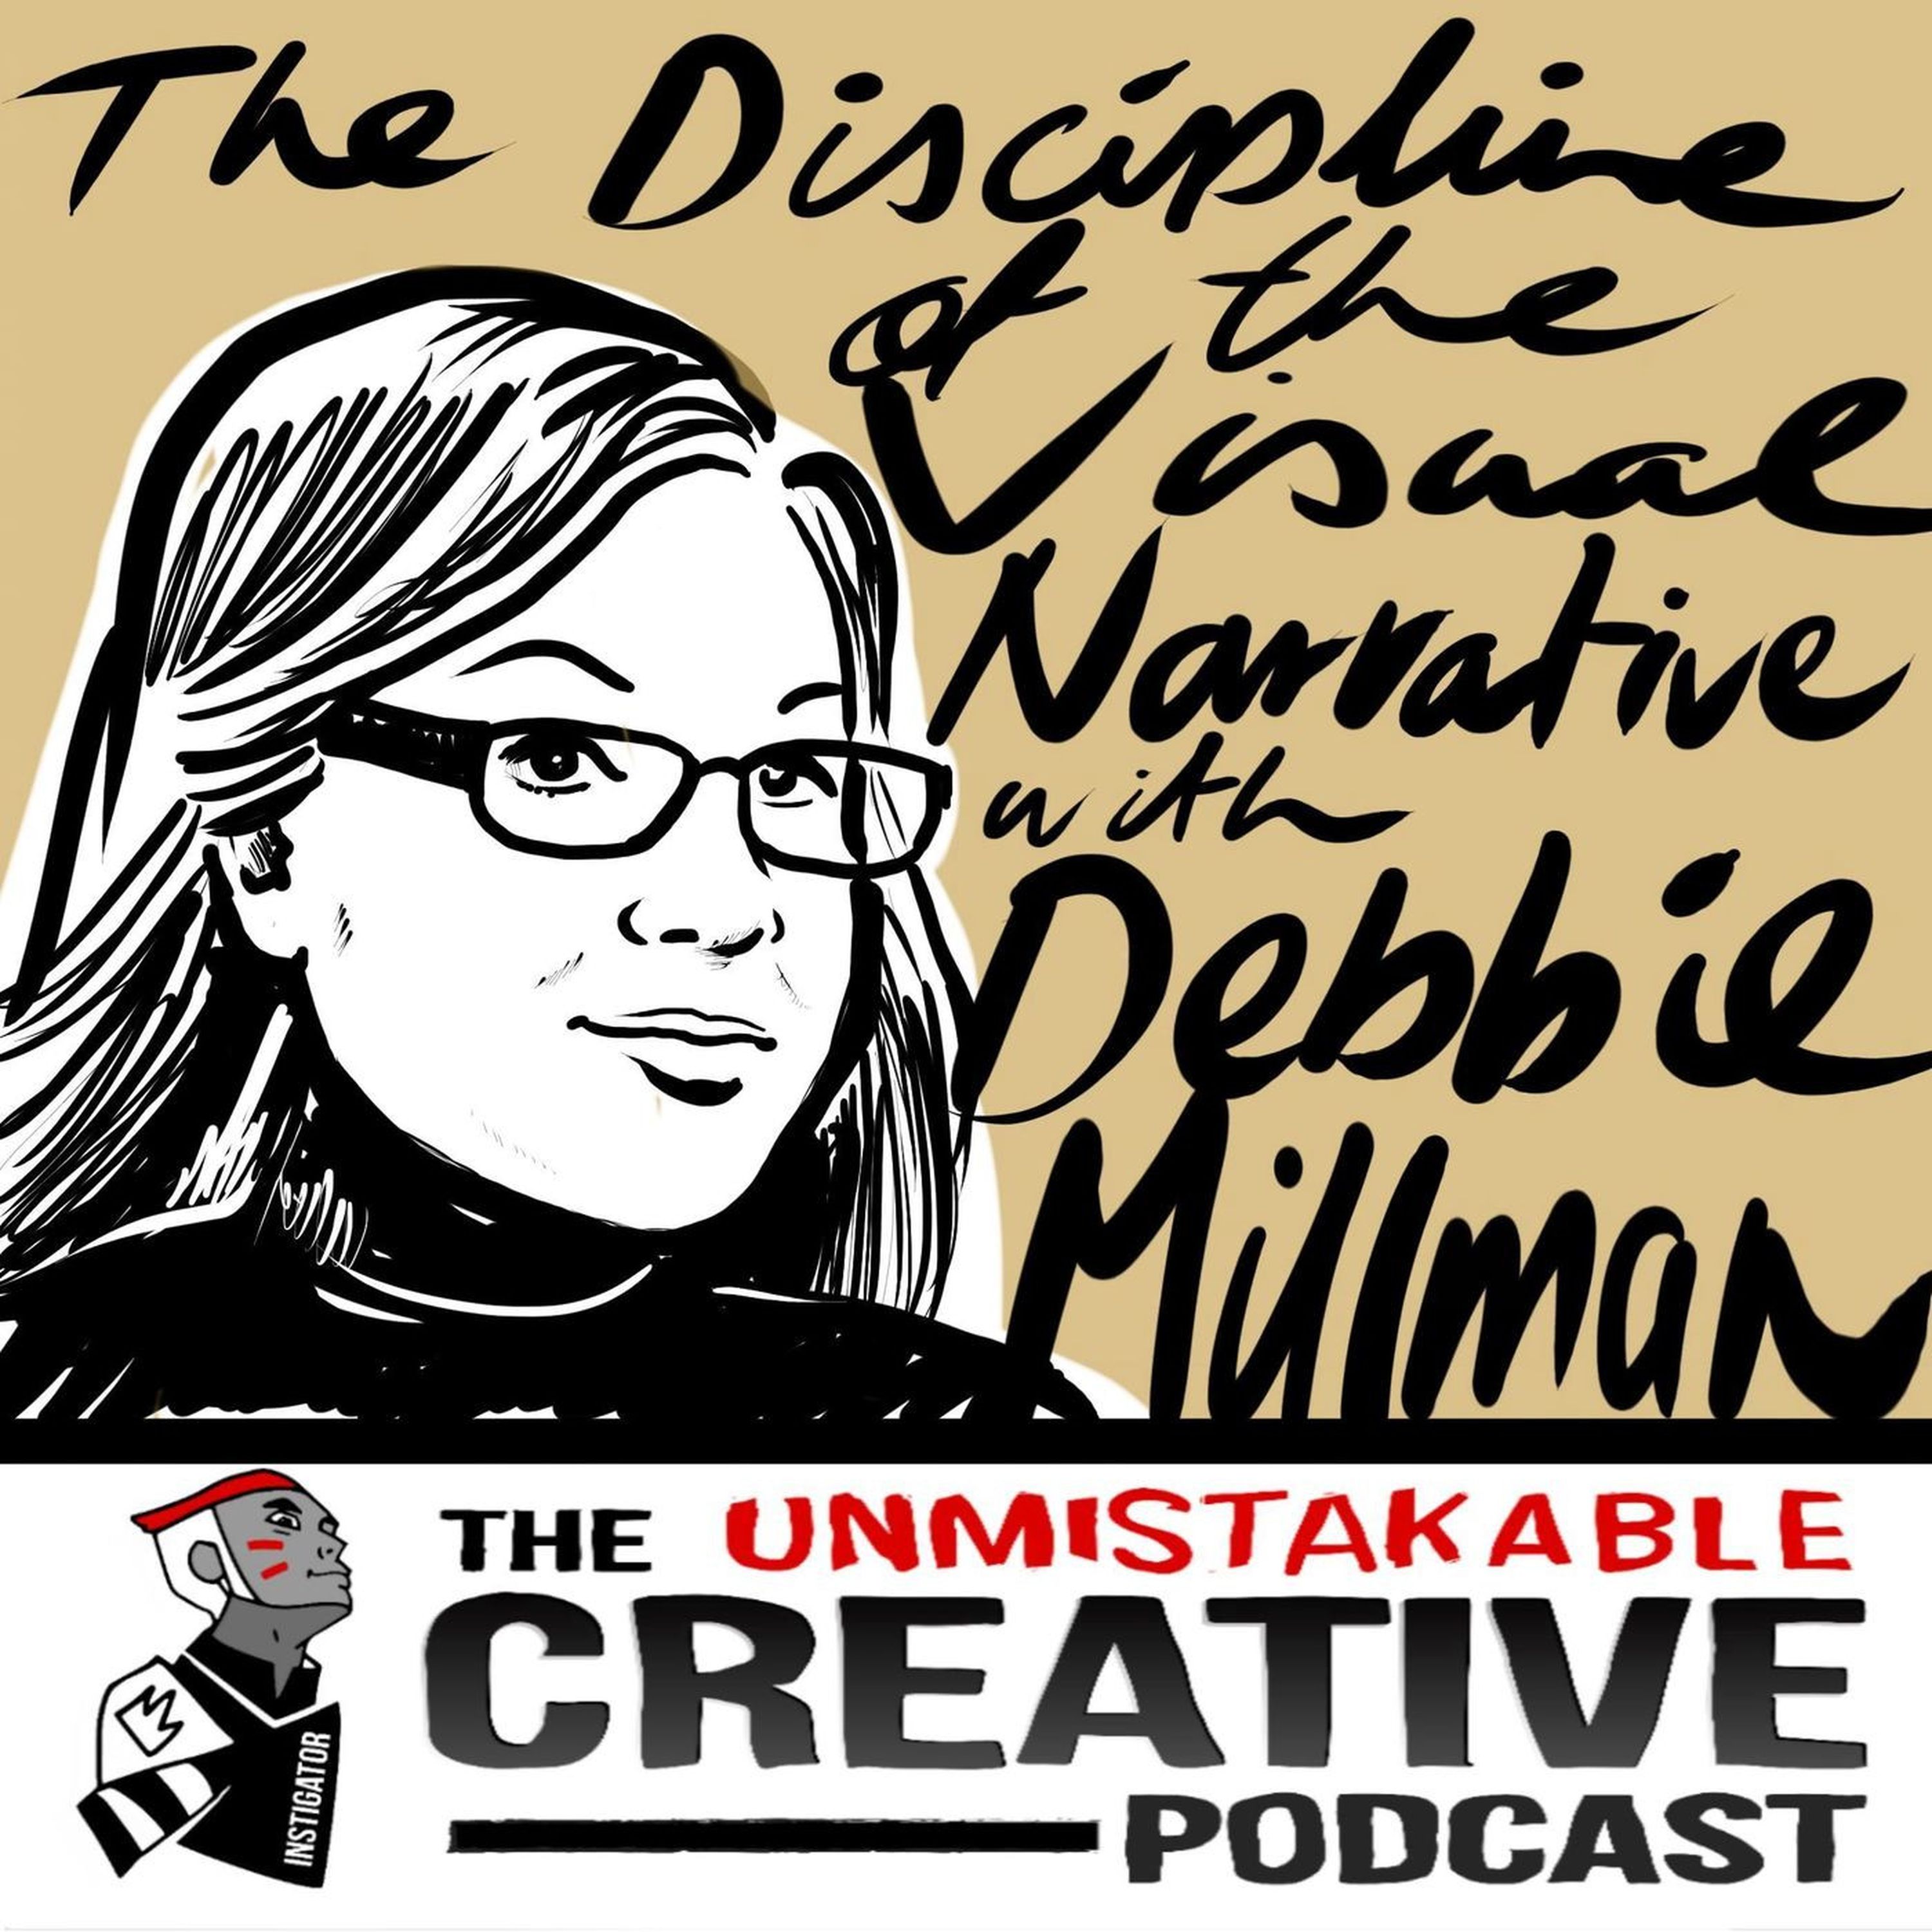 The Discipline of the Visual Narrative with Debbie Millman